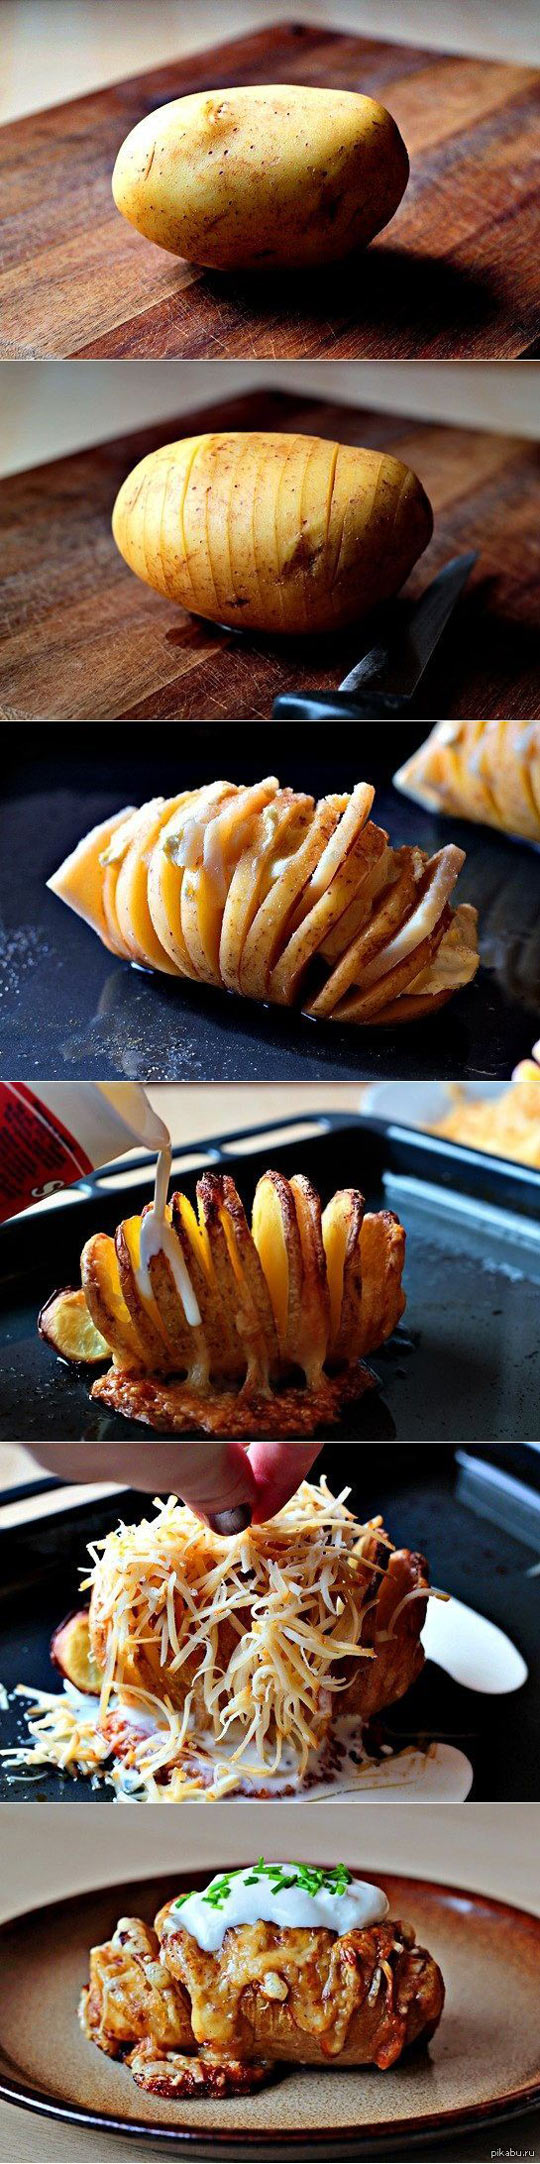 Great Way To Make A Baked Potato